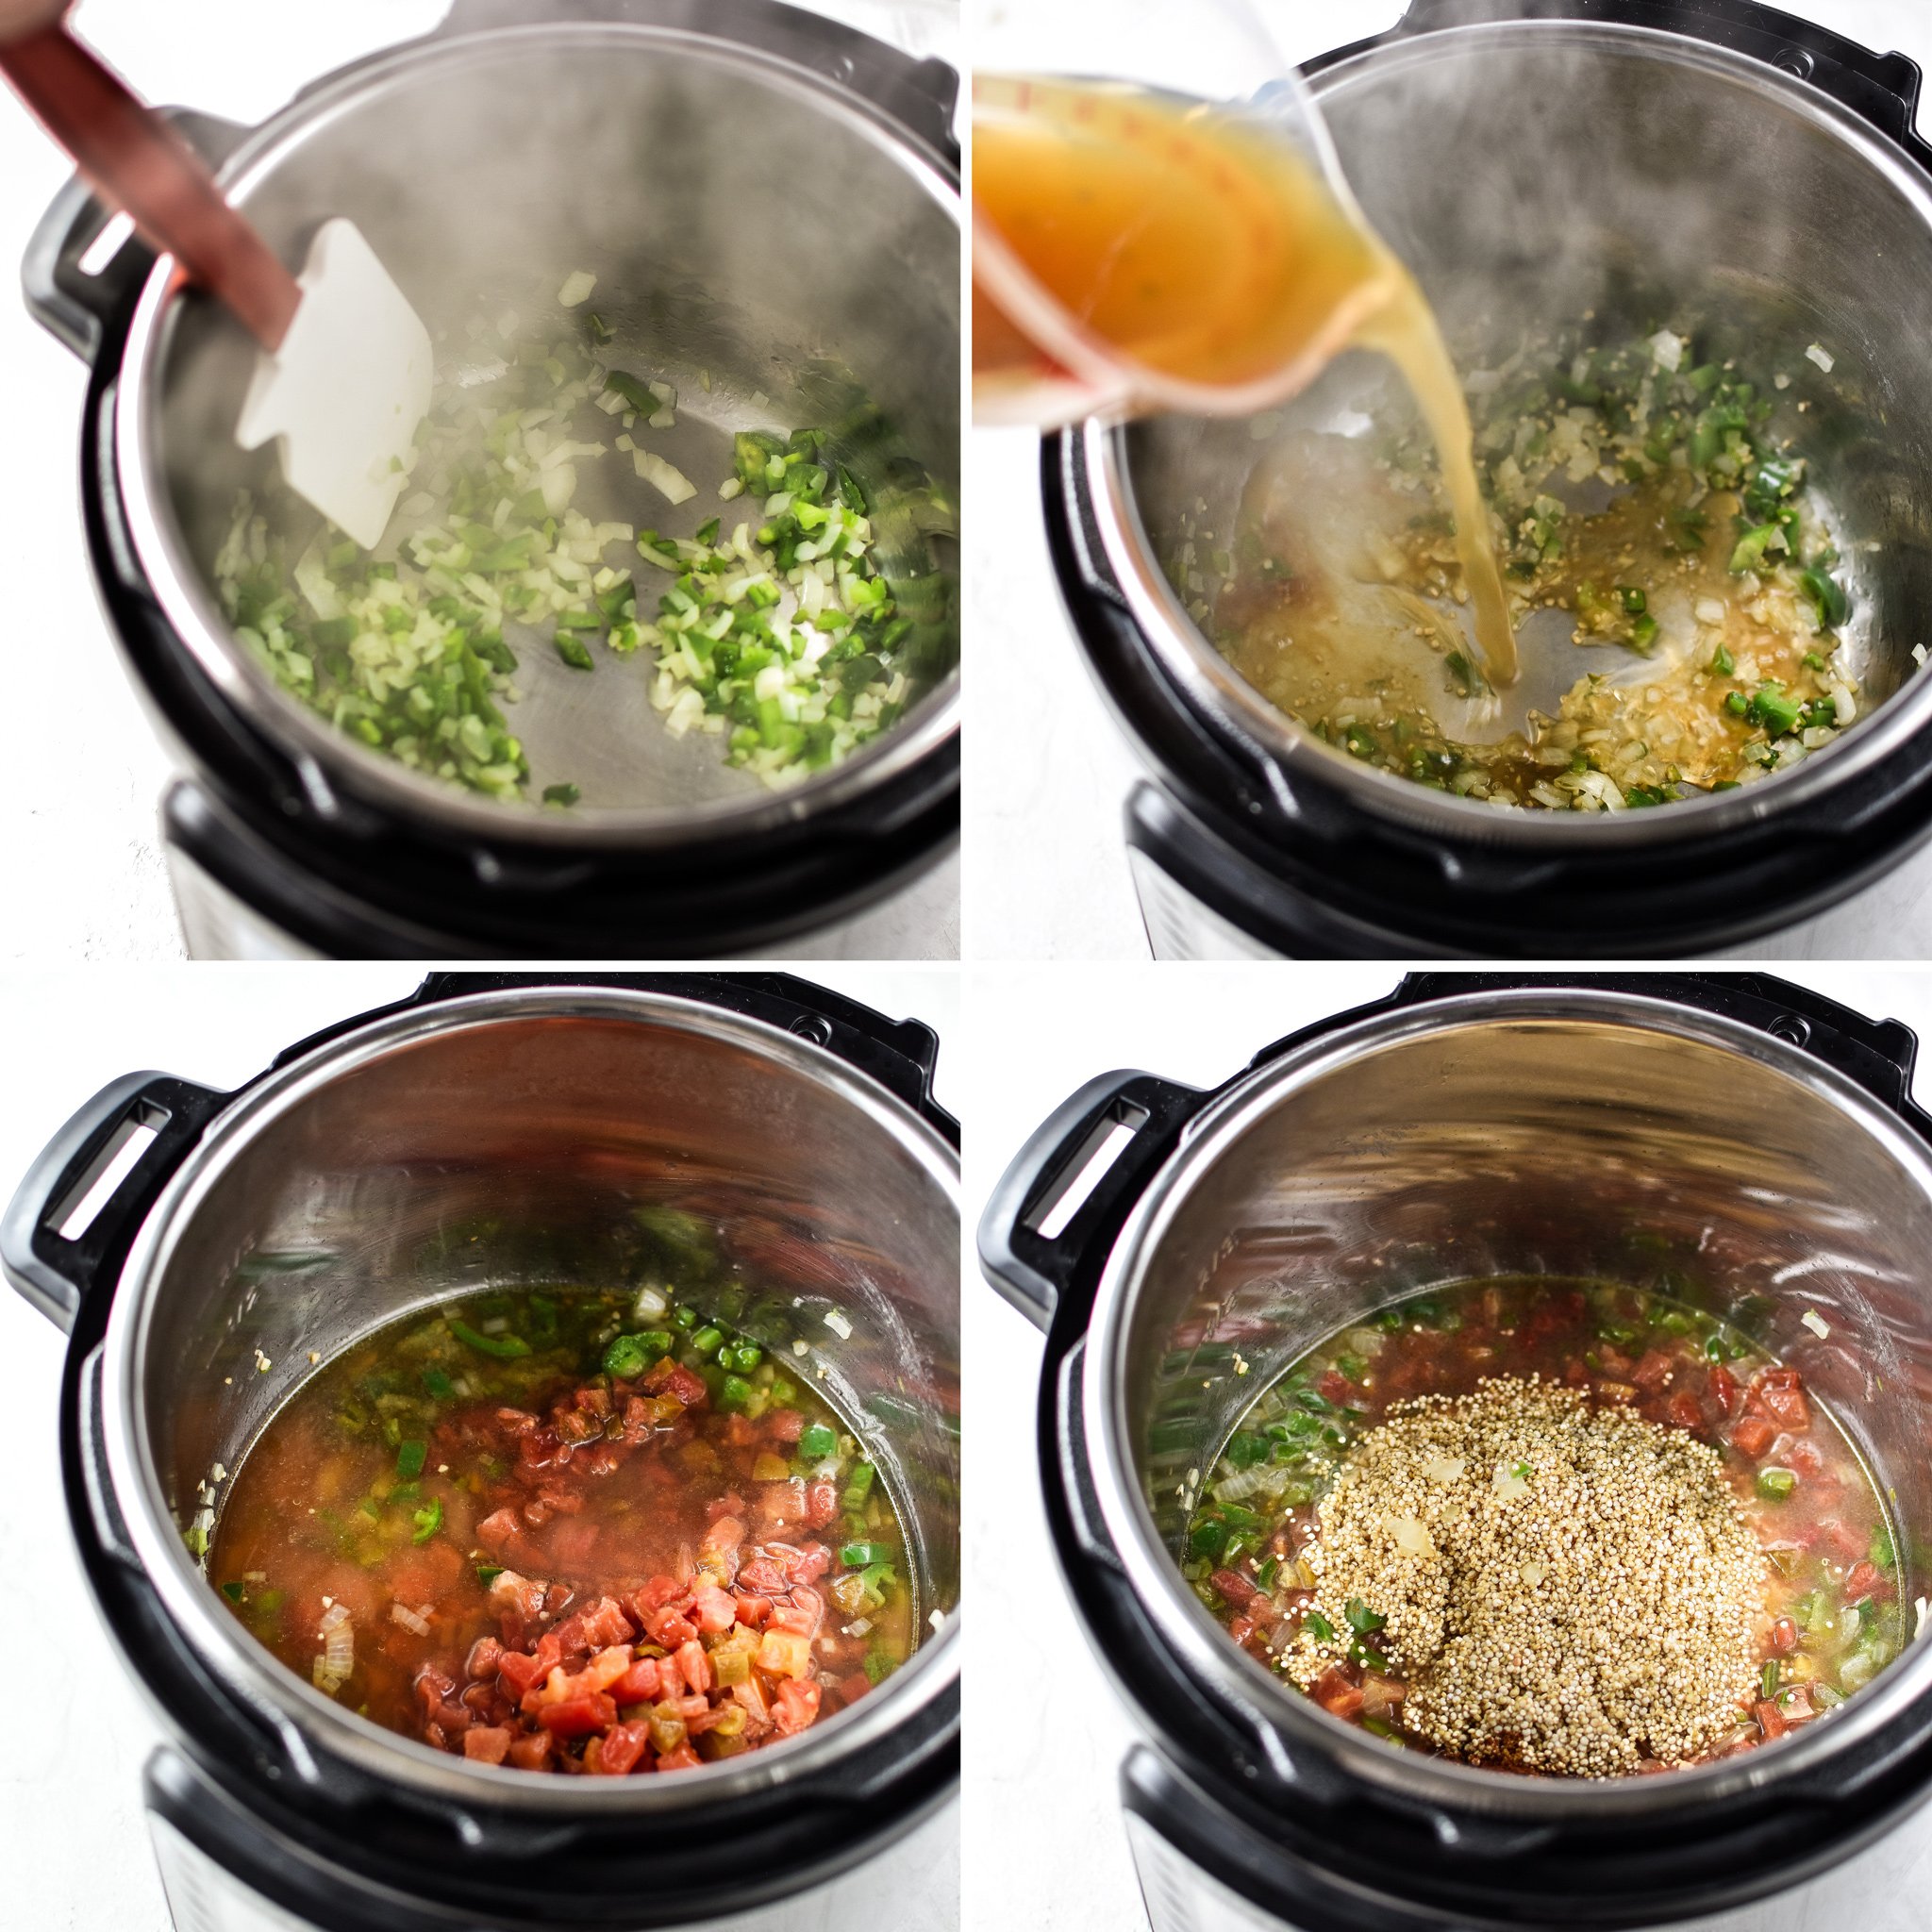 Four photos showing steps to making Mexican Quinoa in the Instant Pot. Start with jalapenos and onion, add broth, tomatoes, quinoa, then cook.